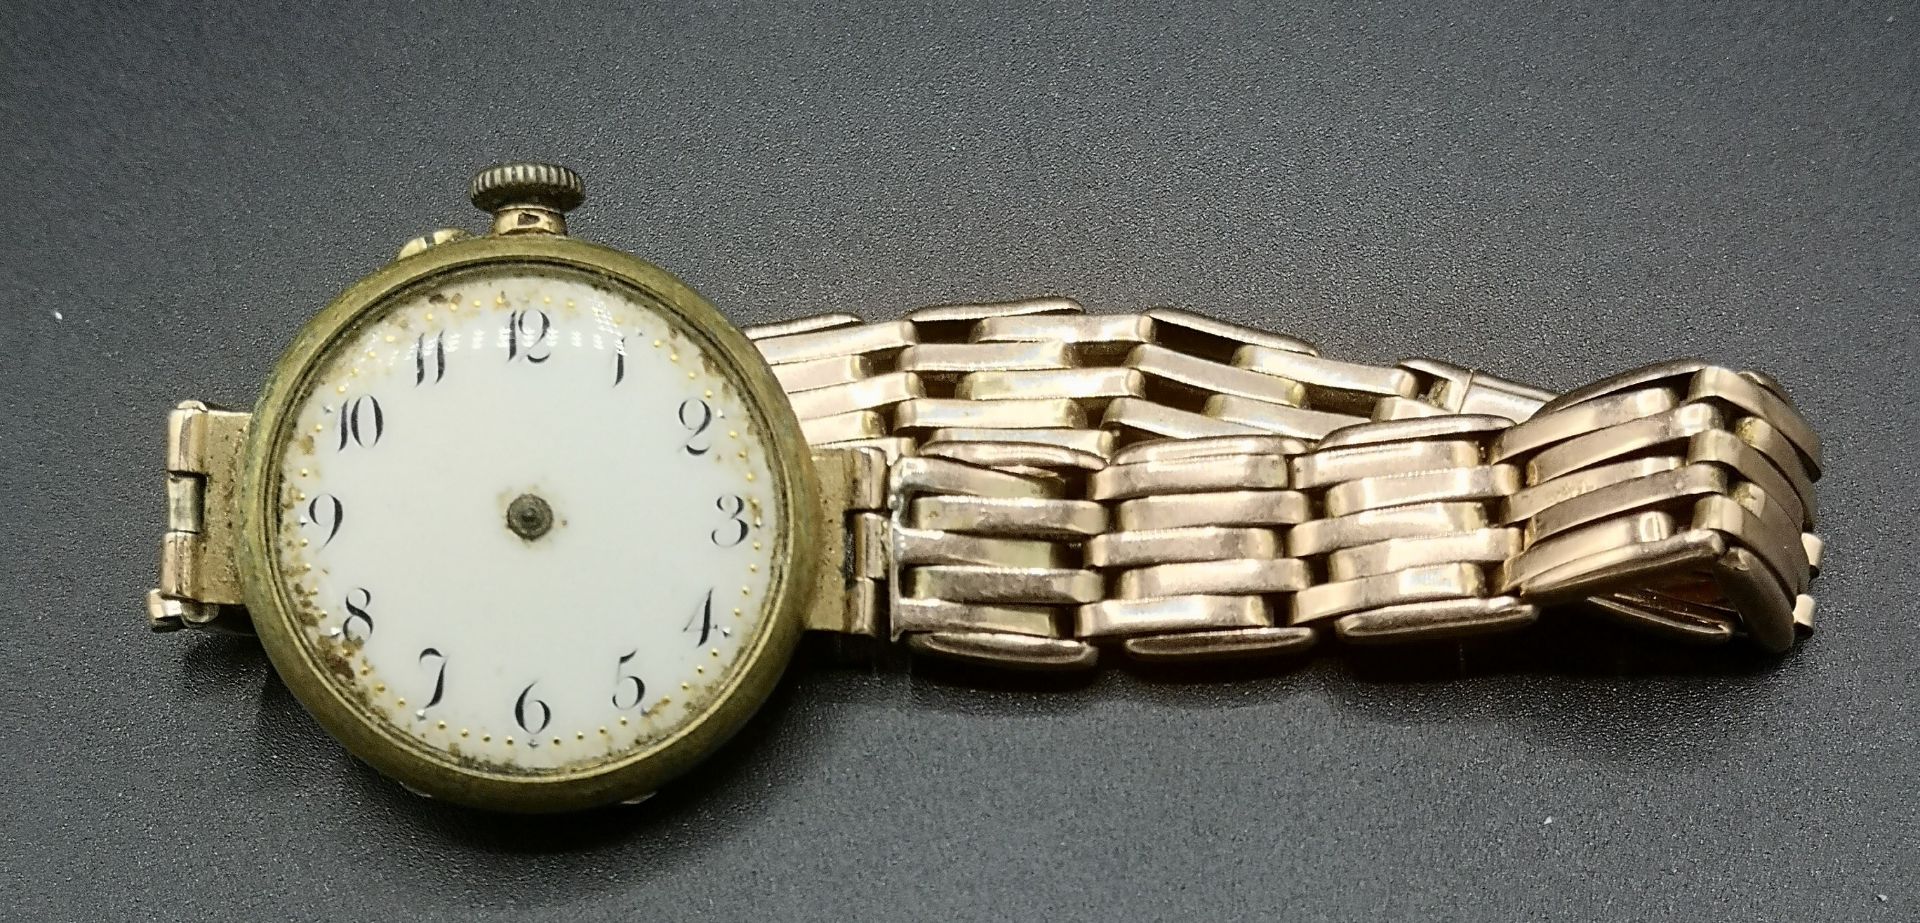 18ct gold case wrist watch together with a Swiss made wrist watch - Image 4 of 7